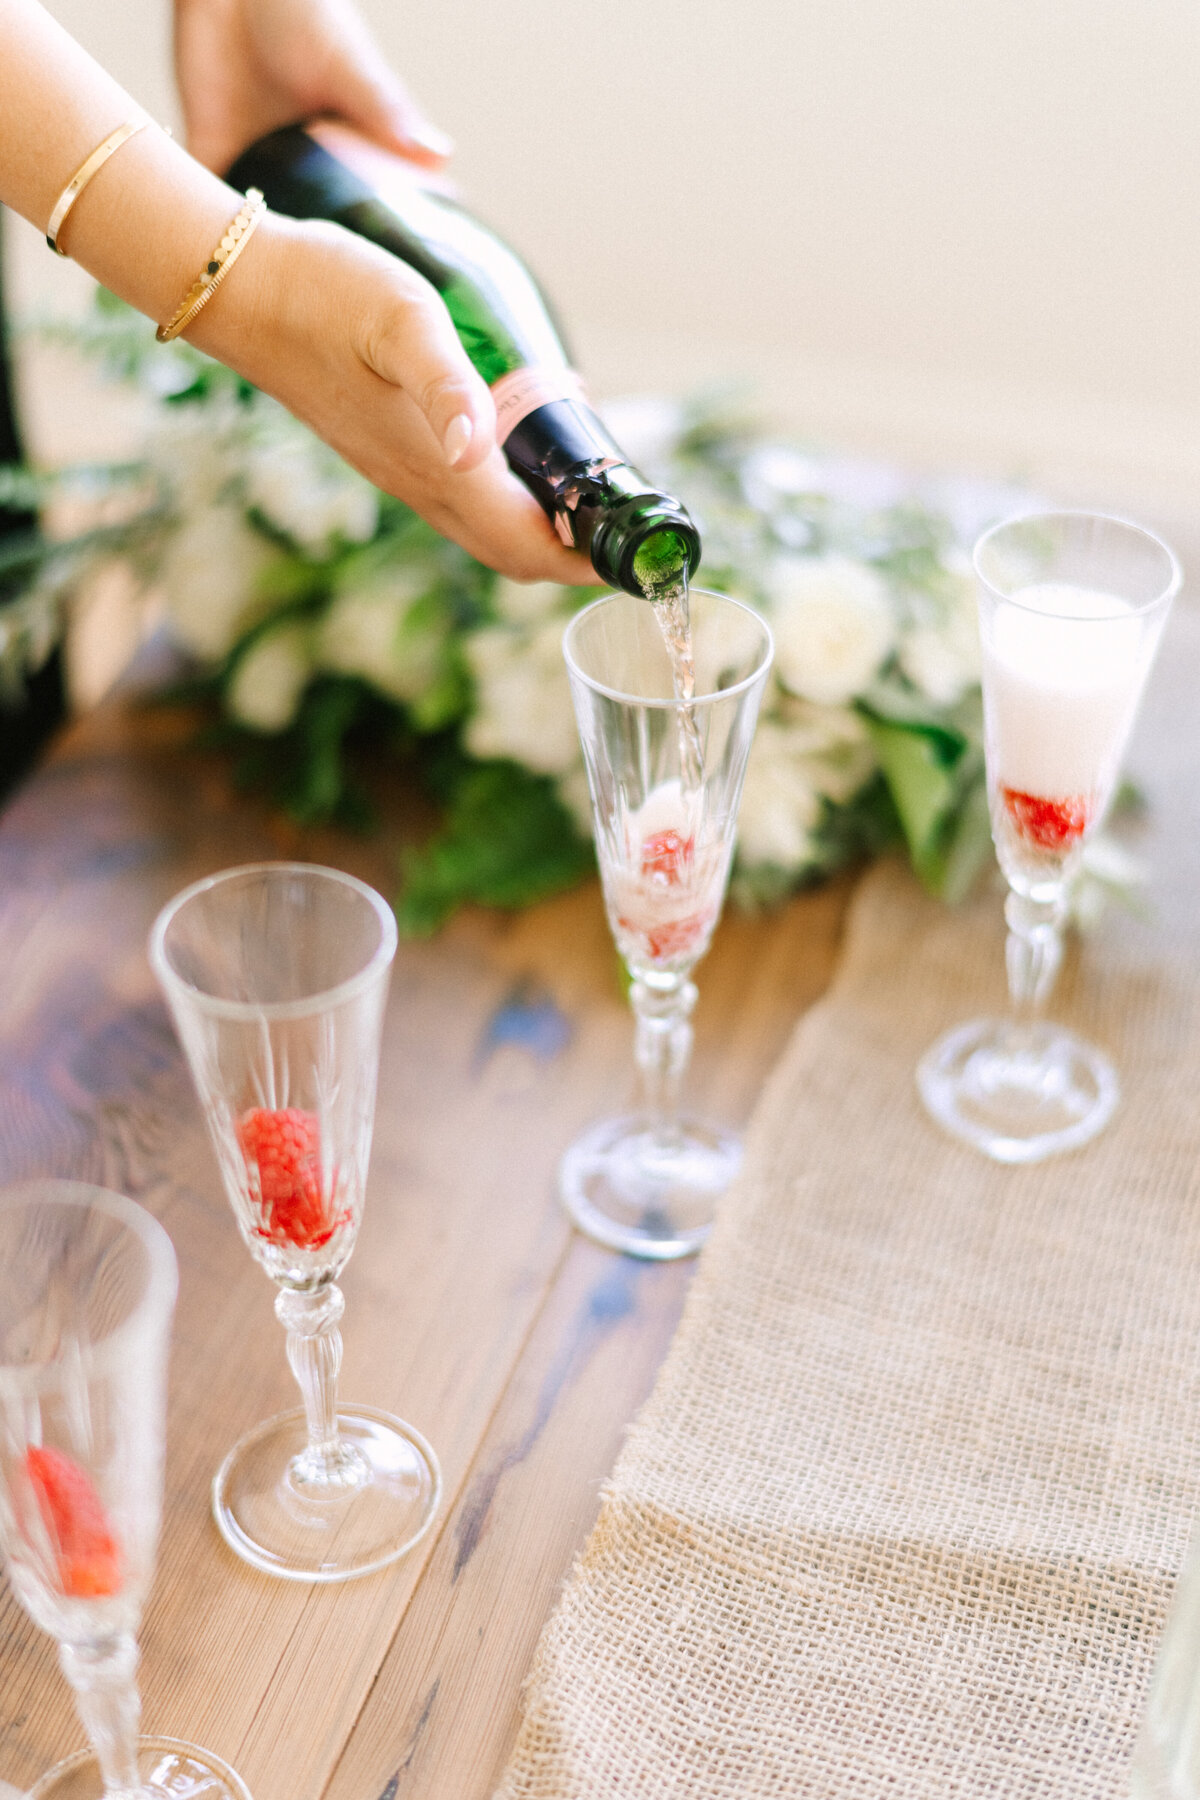 celebratory champagne being poured for wedding day toast